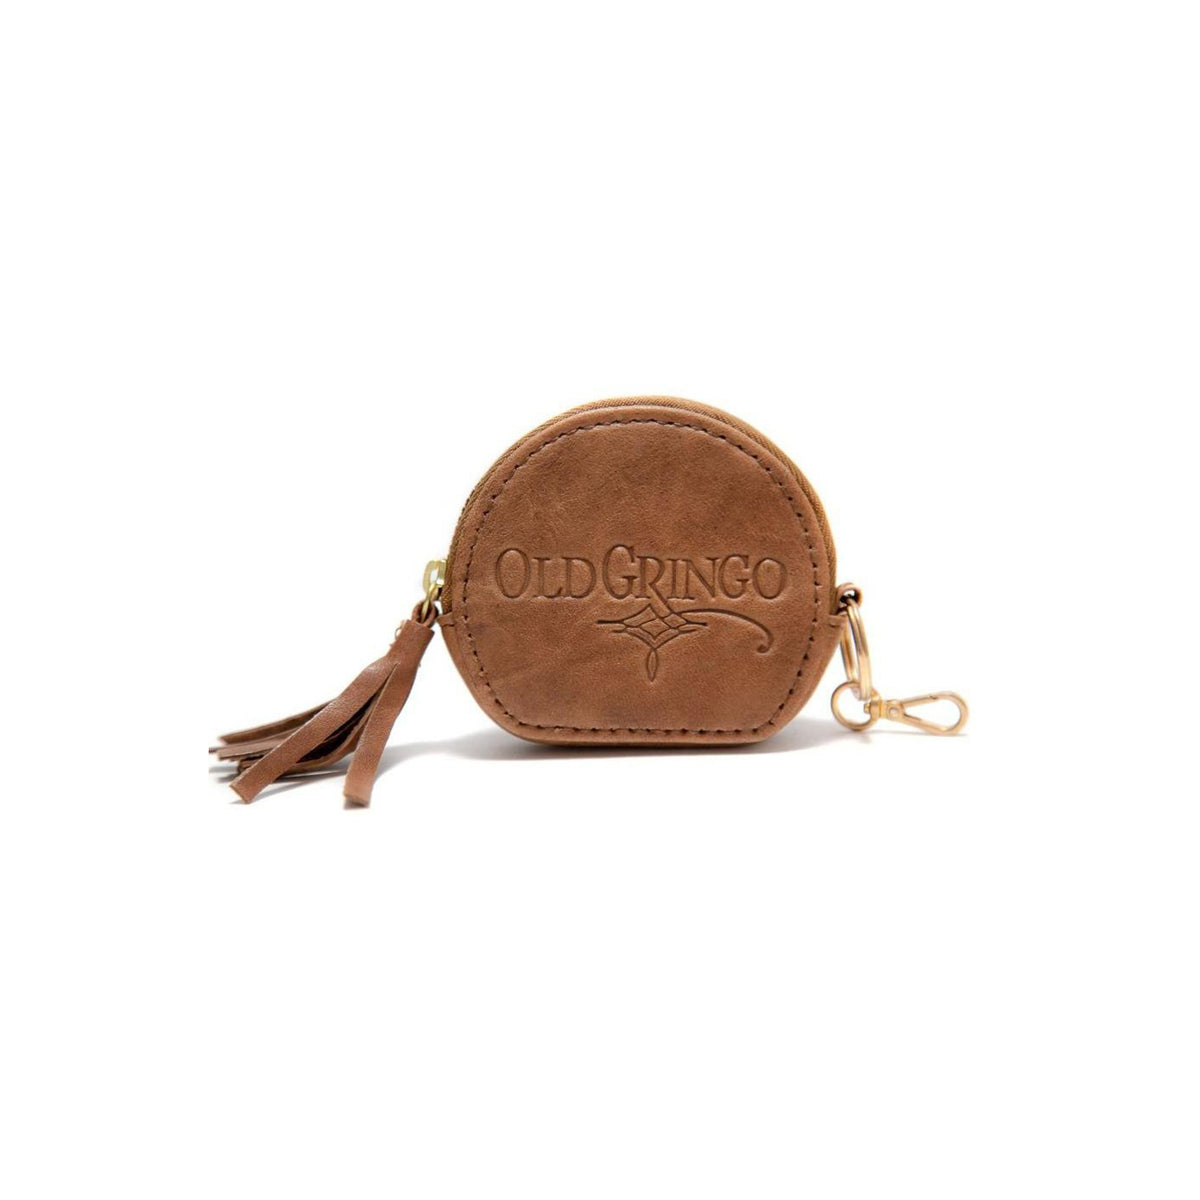 Ferrage - Soft leather coin purses available at Ferrage,... | Facebook